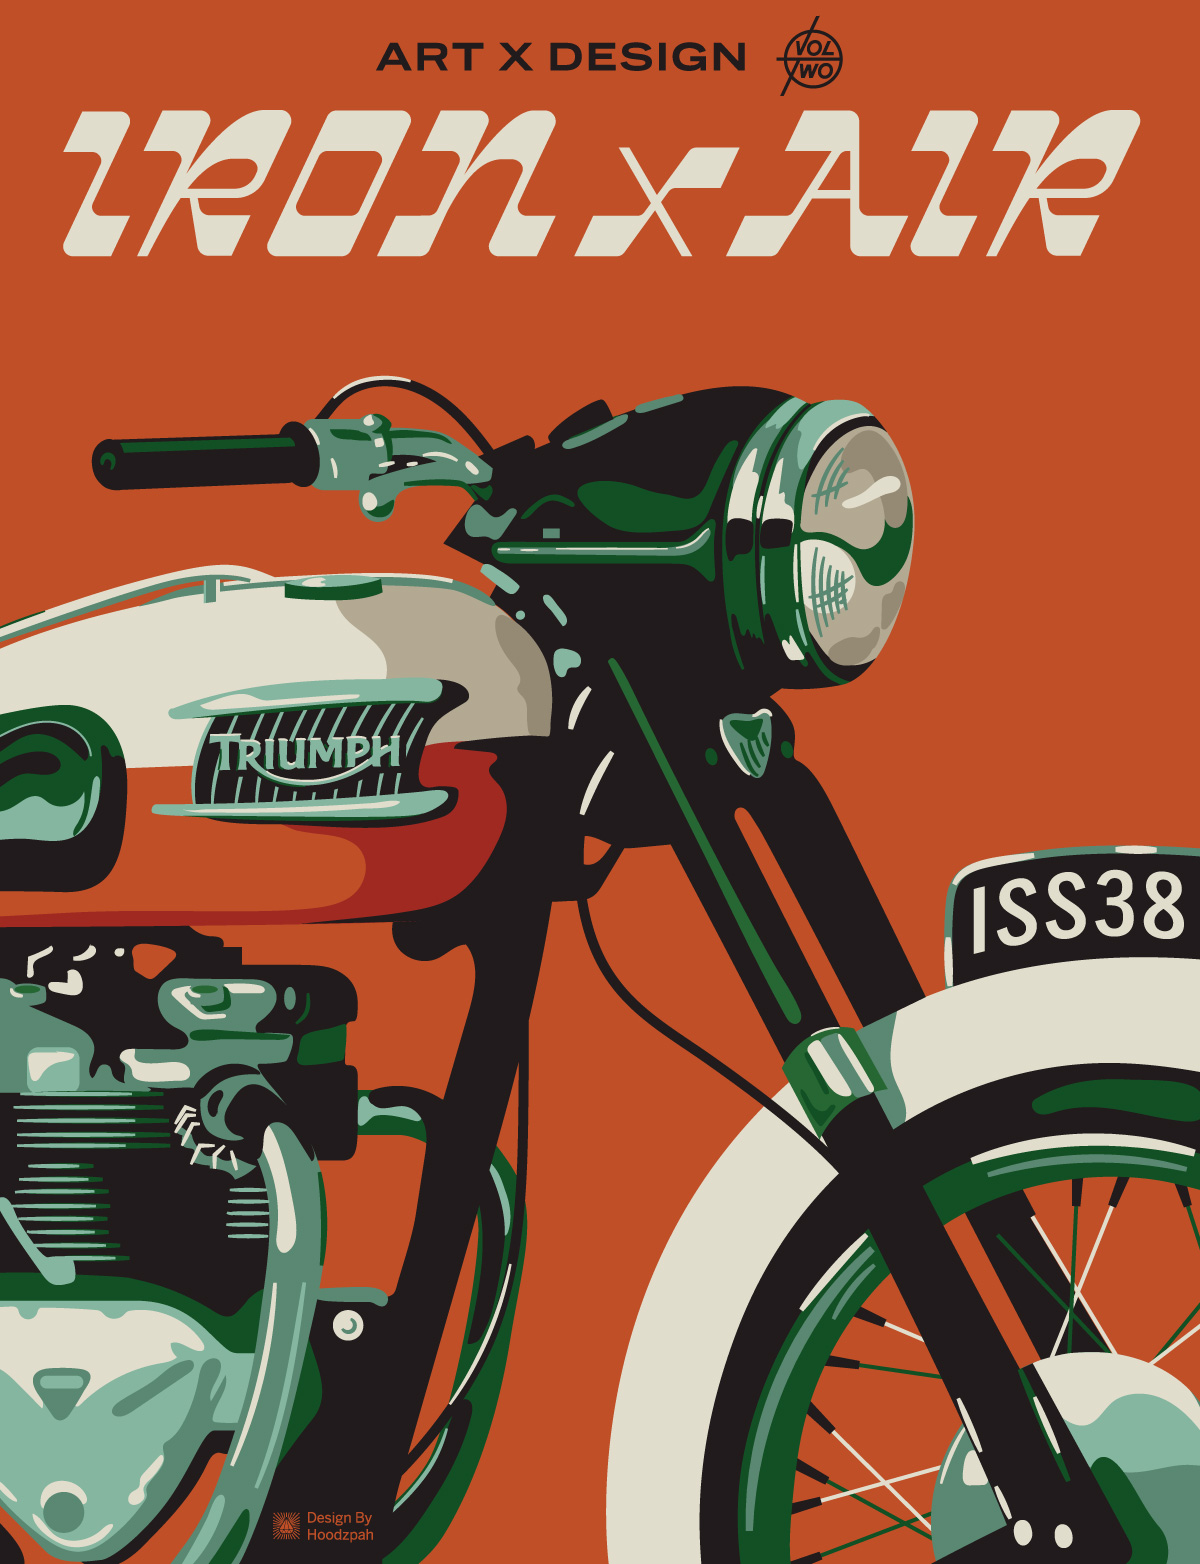 Iron and Air Magazine cover illustration of a Triumph motorcycle